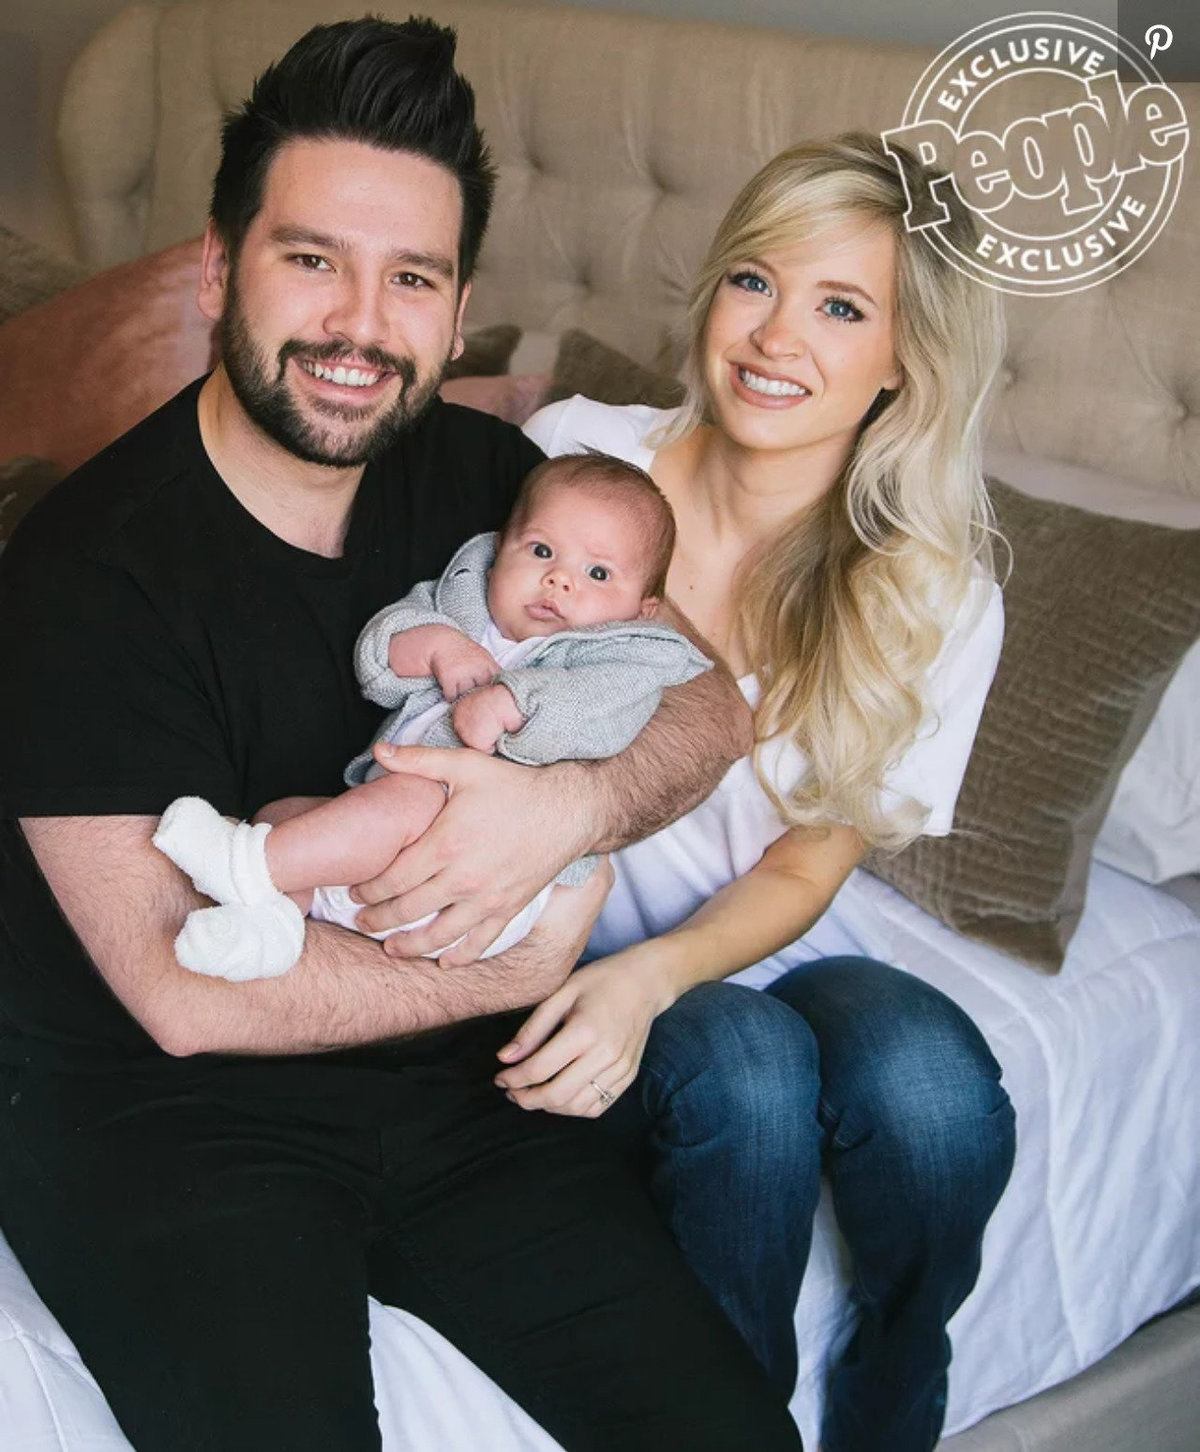 Screenshot_2020-02-03 Dan + Shay's Shay Mooney and Fiancée Hannah Introduce Son Asher James 'He's Such a Happy Baby'(1)